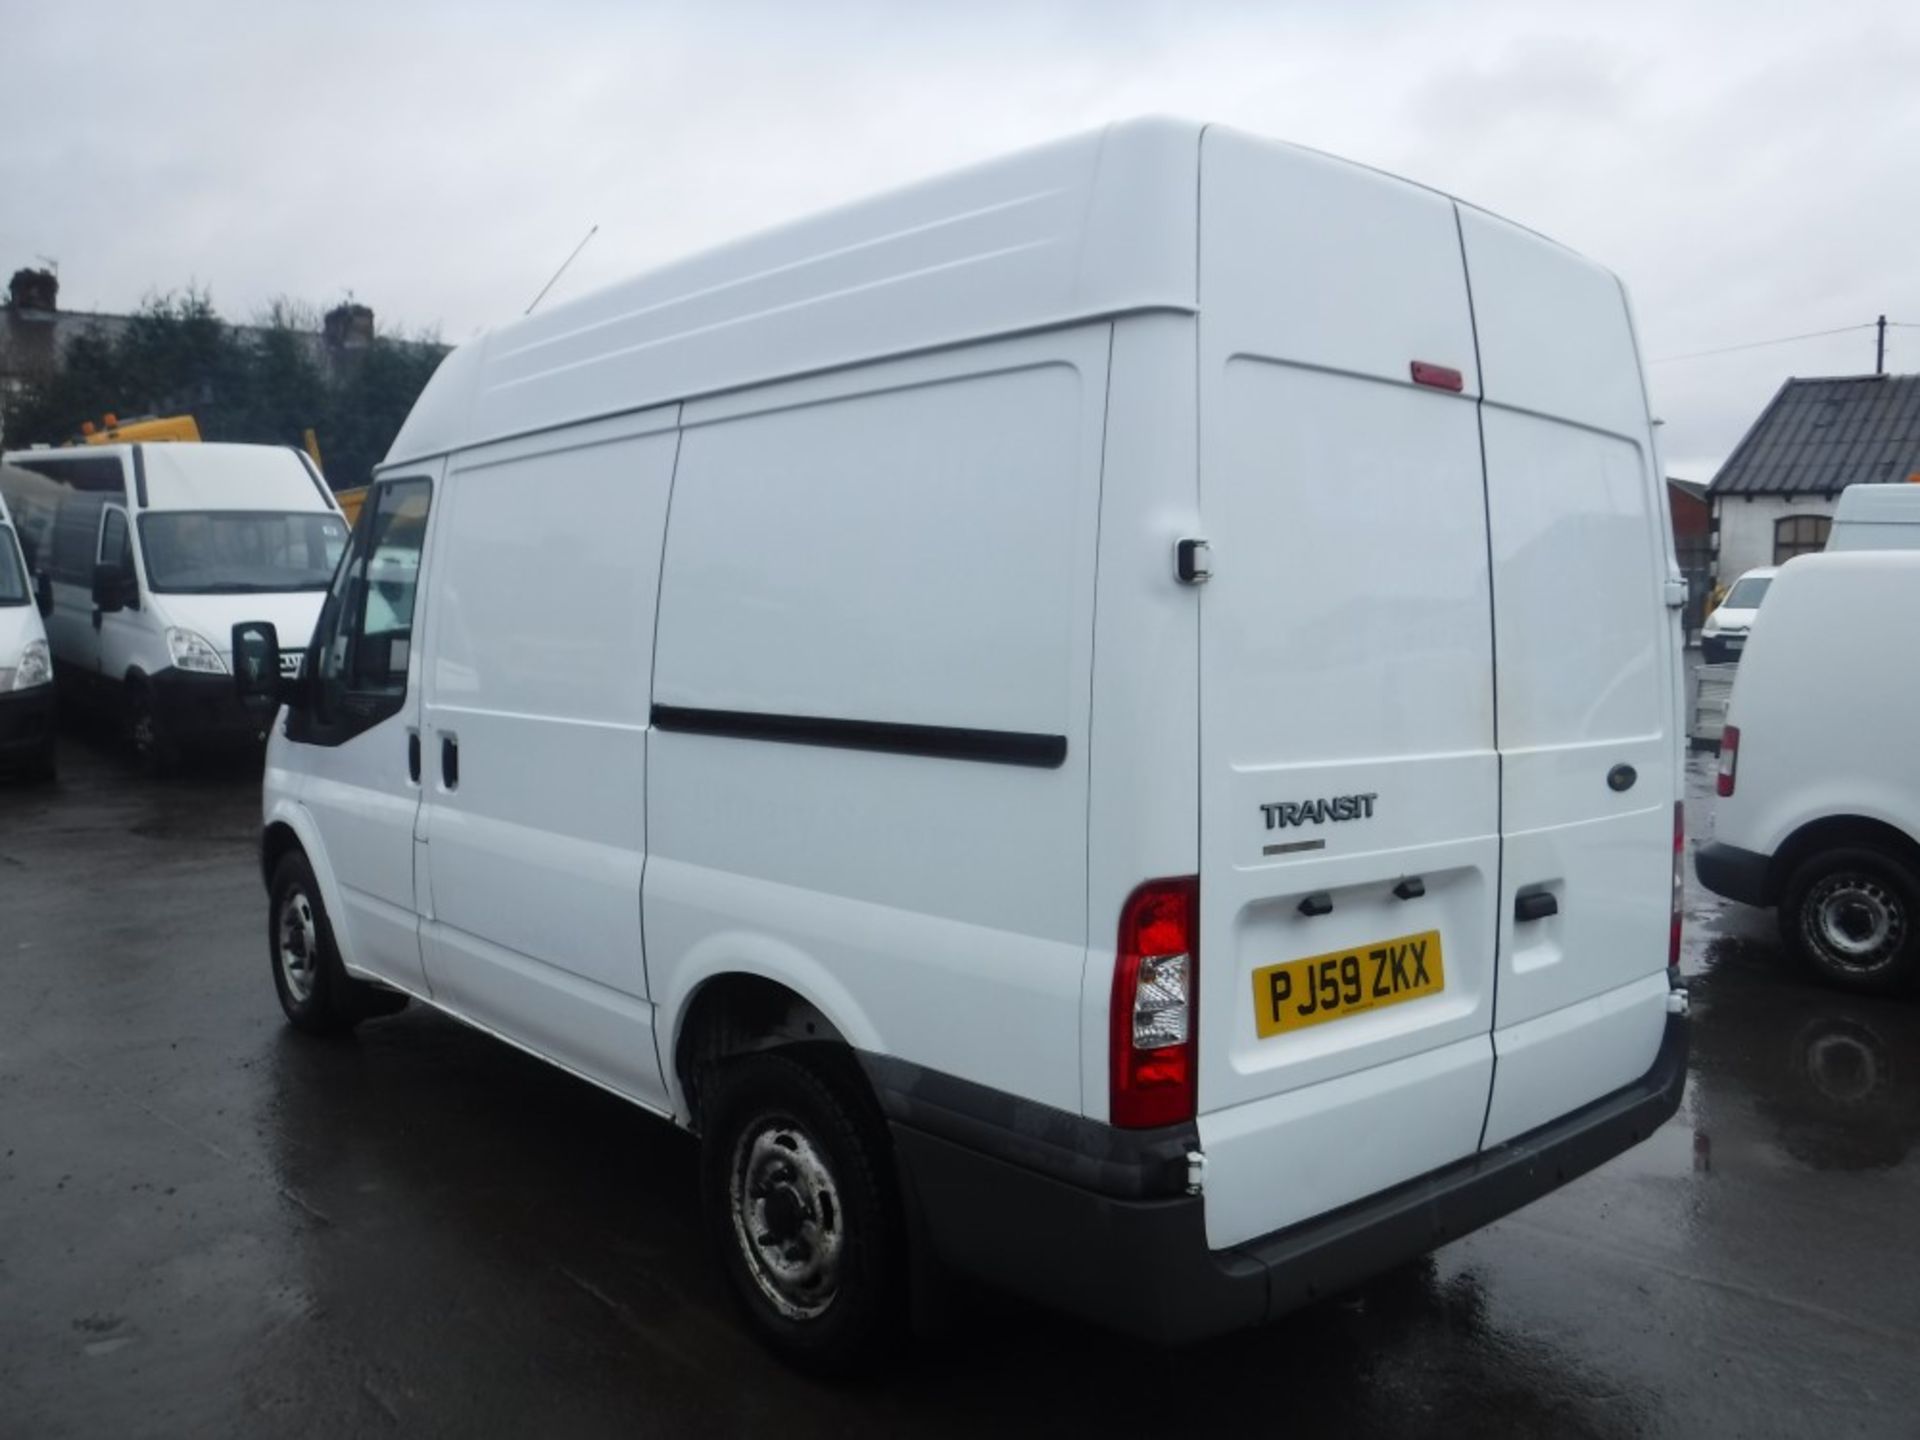 59 reg FORD TRANSIT T280S FWD VAN (DIRECT COUNCIL) 1ST REG 01/10, 78436M, V5 HERE, 1 OWNER FROM - Image 3 of 5